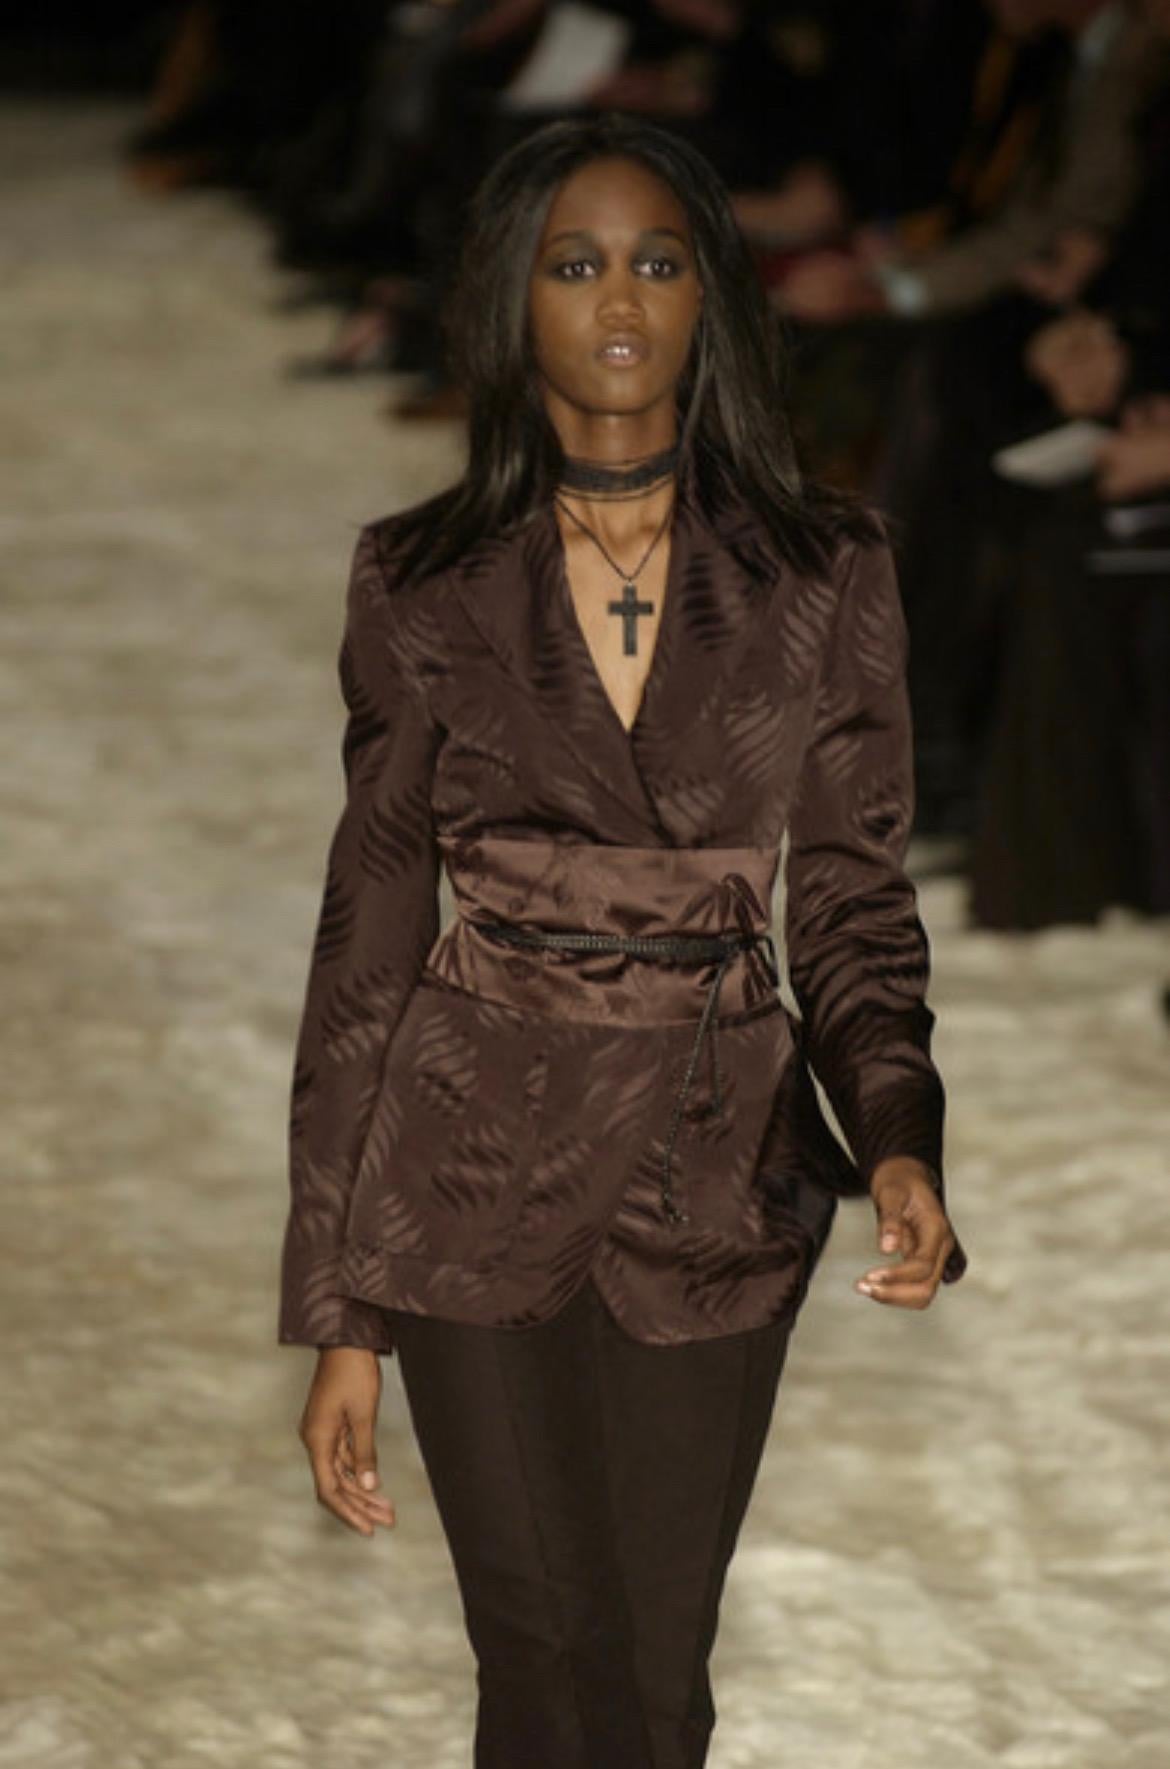 Presenting a gorgeous floral print Gucci skirt, designed by Tom Ford. From the Fall/Winter 2002 collection, this rock-chic silk skirt features a silt at the back as well as a built-in fastener. While this piece did not appear on the runway, the goth